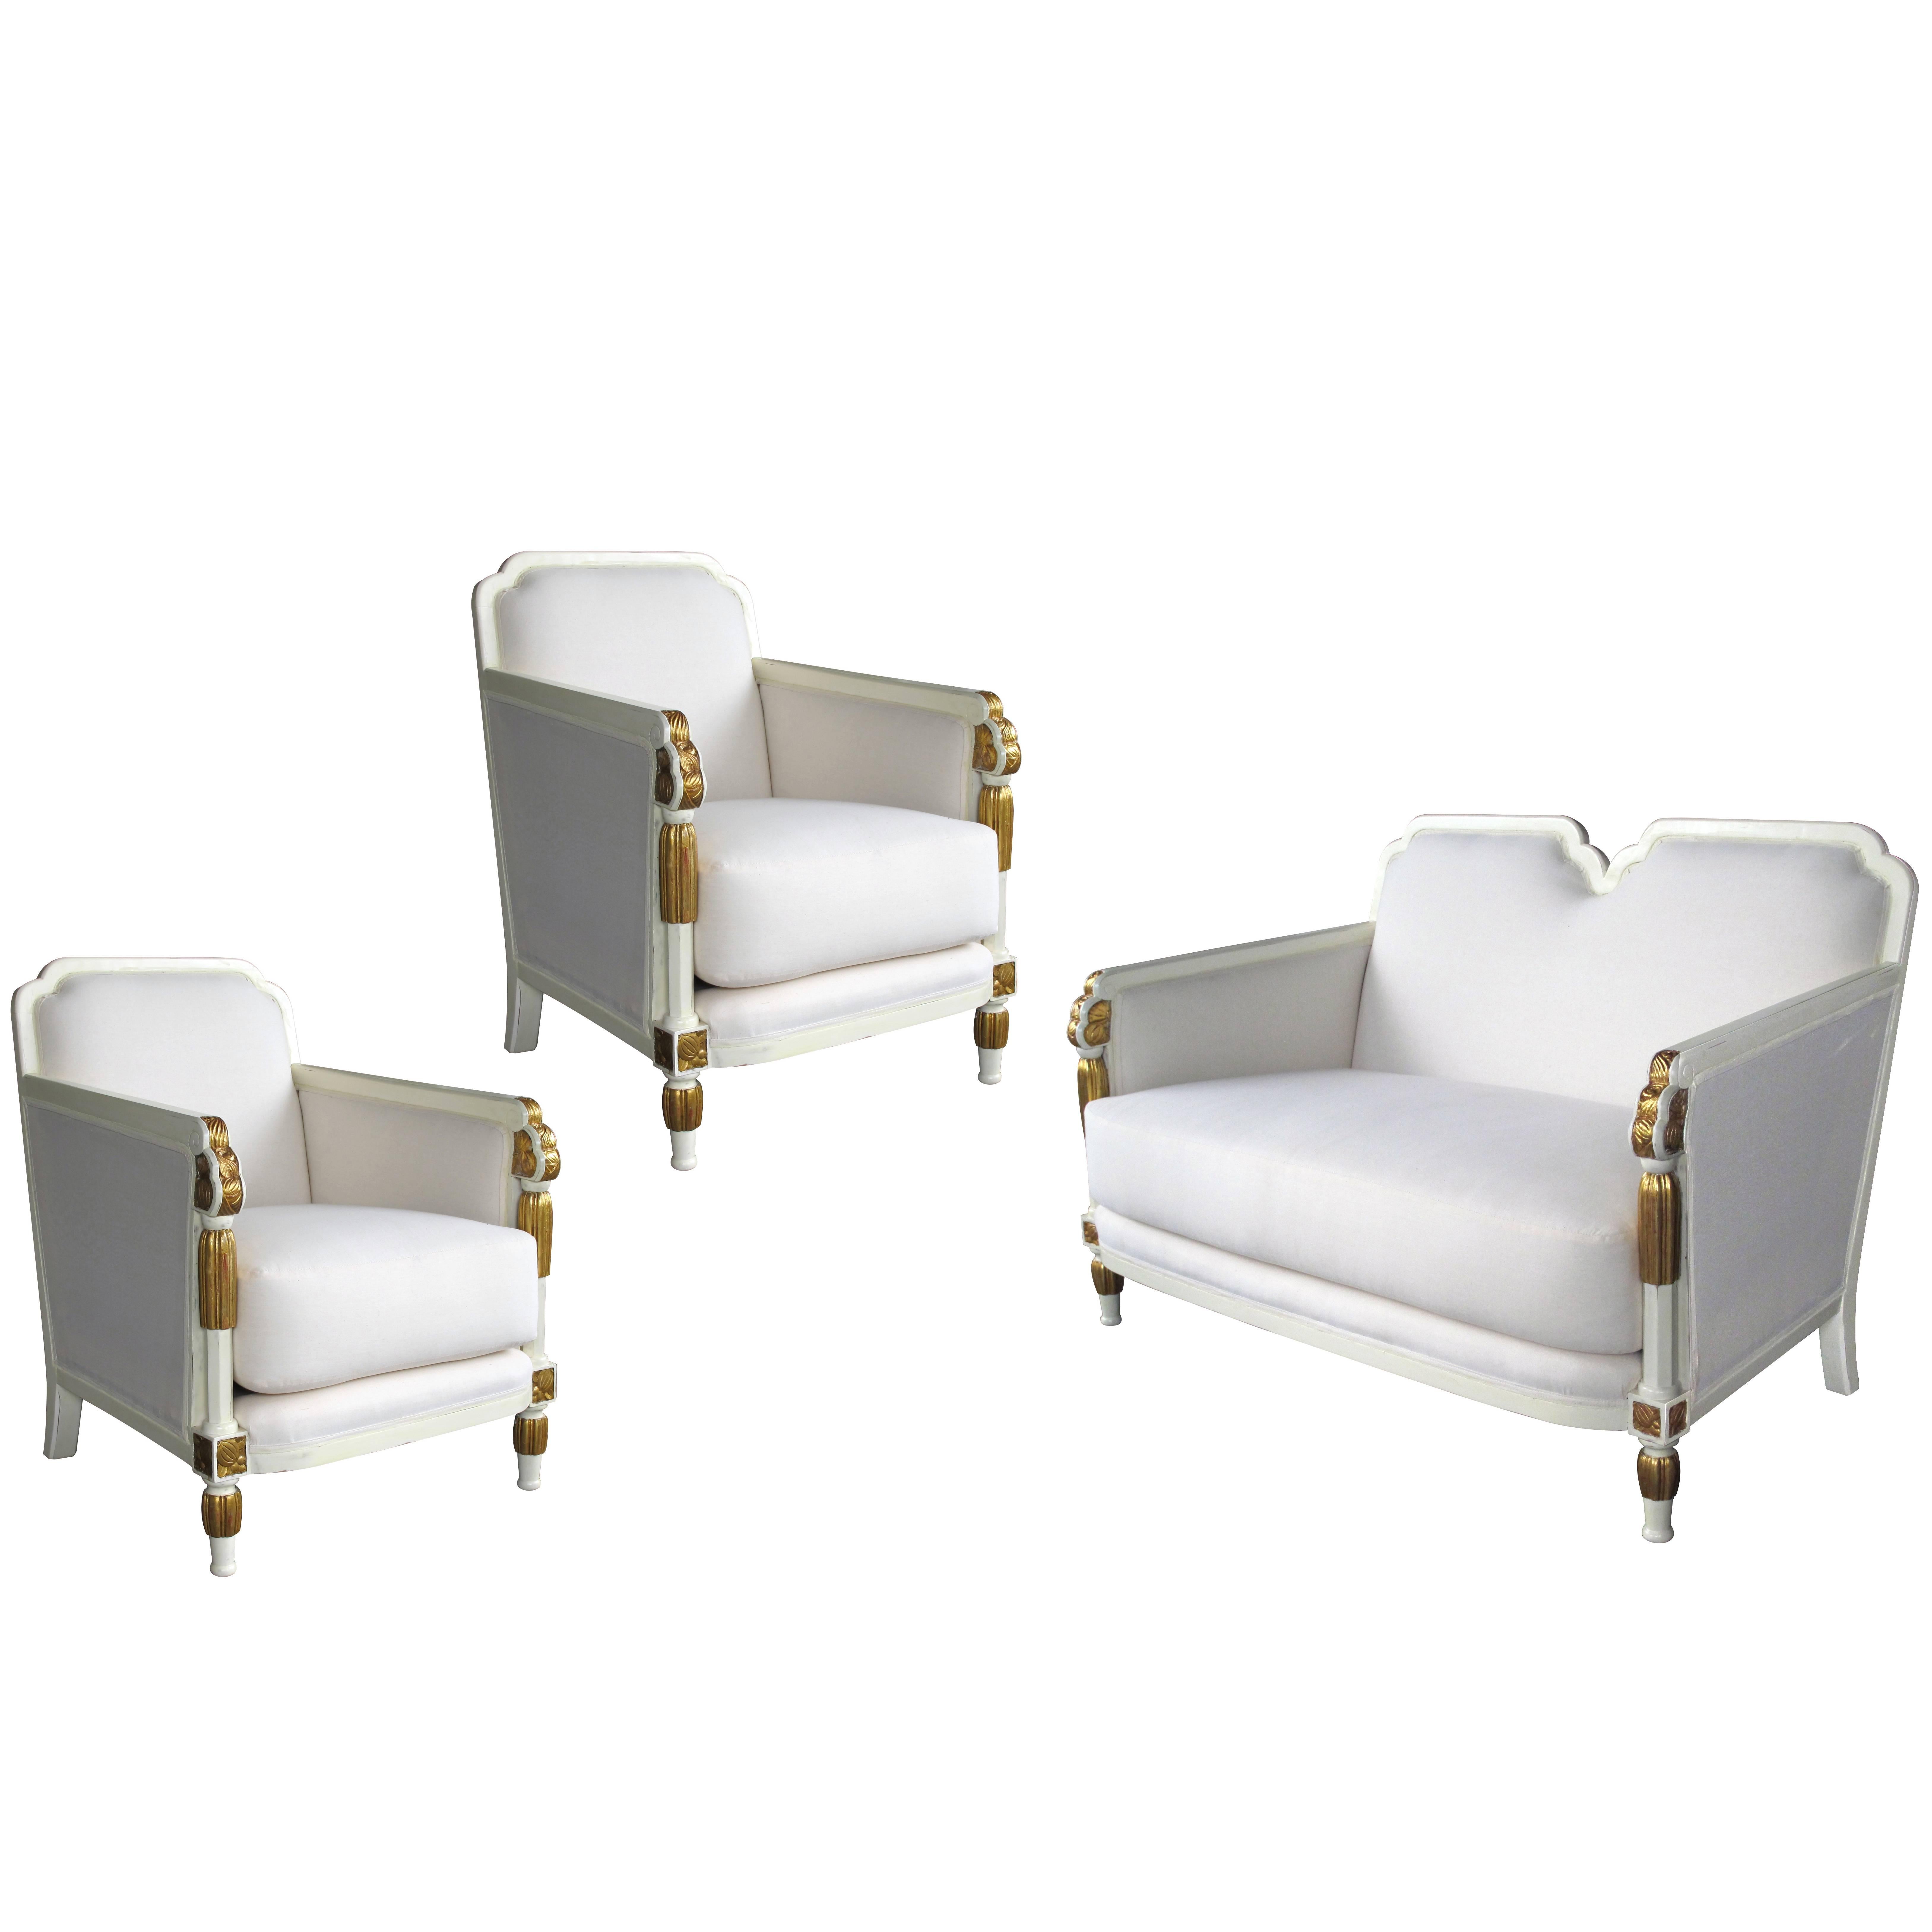 Stylish French Art Deco Ivory Painted & Parcel-Gilt Suite of Two Chairs & Settee